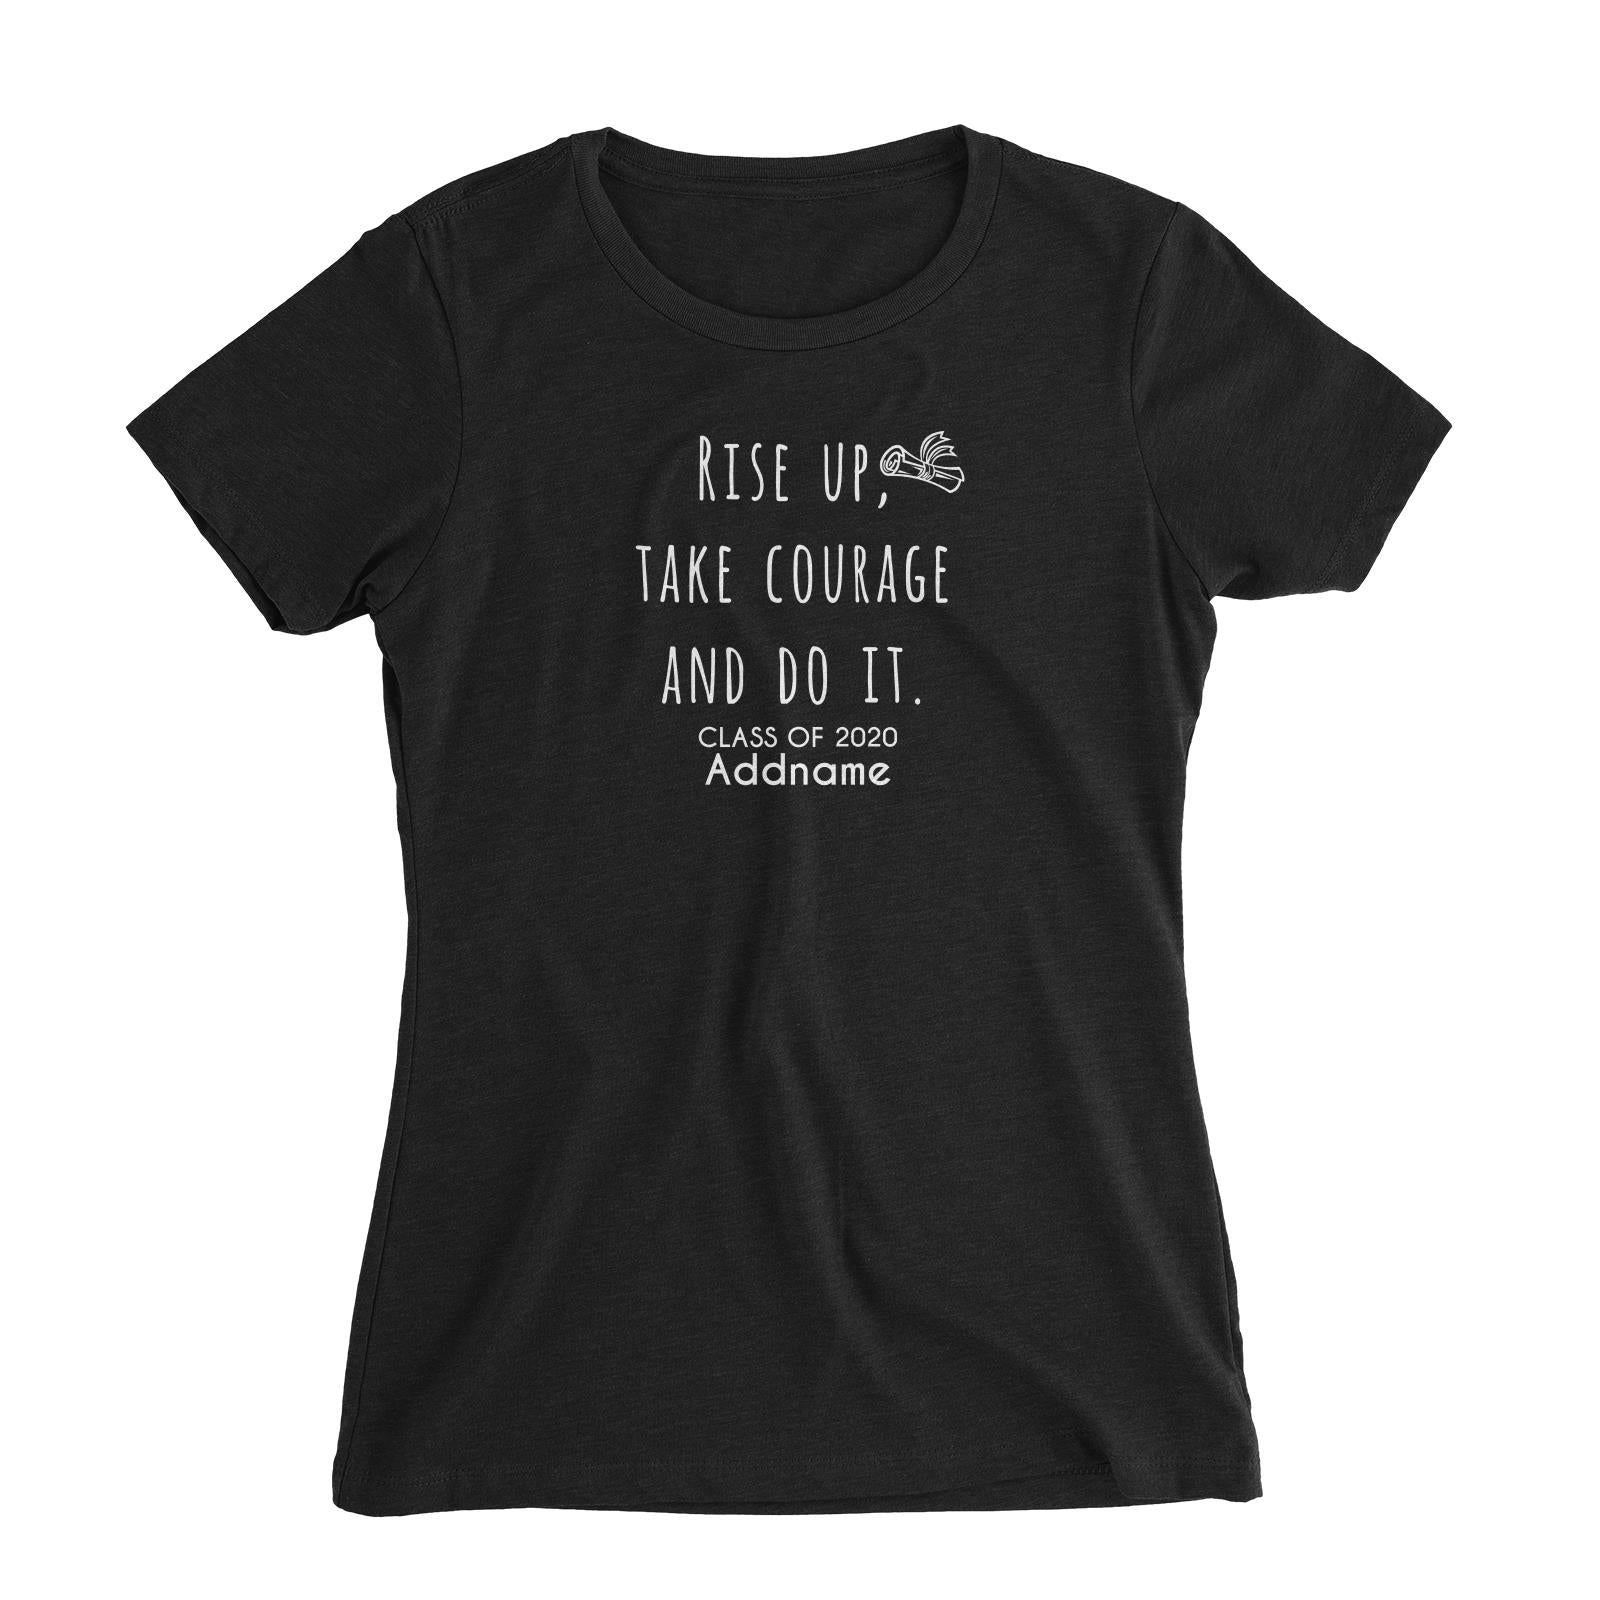 Graduation Series Rise Up, Take Courage And Do It Women's Slim Fit T-Shirt